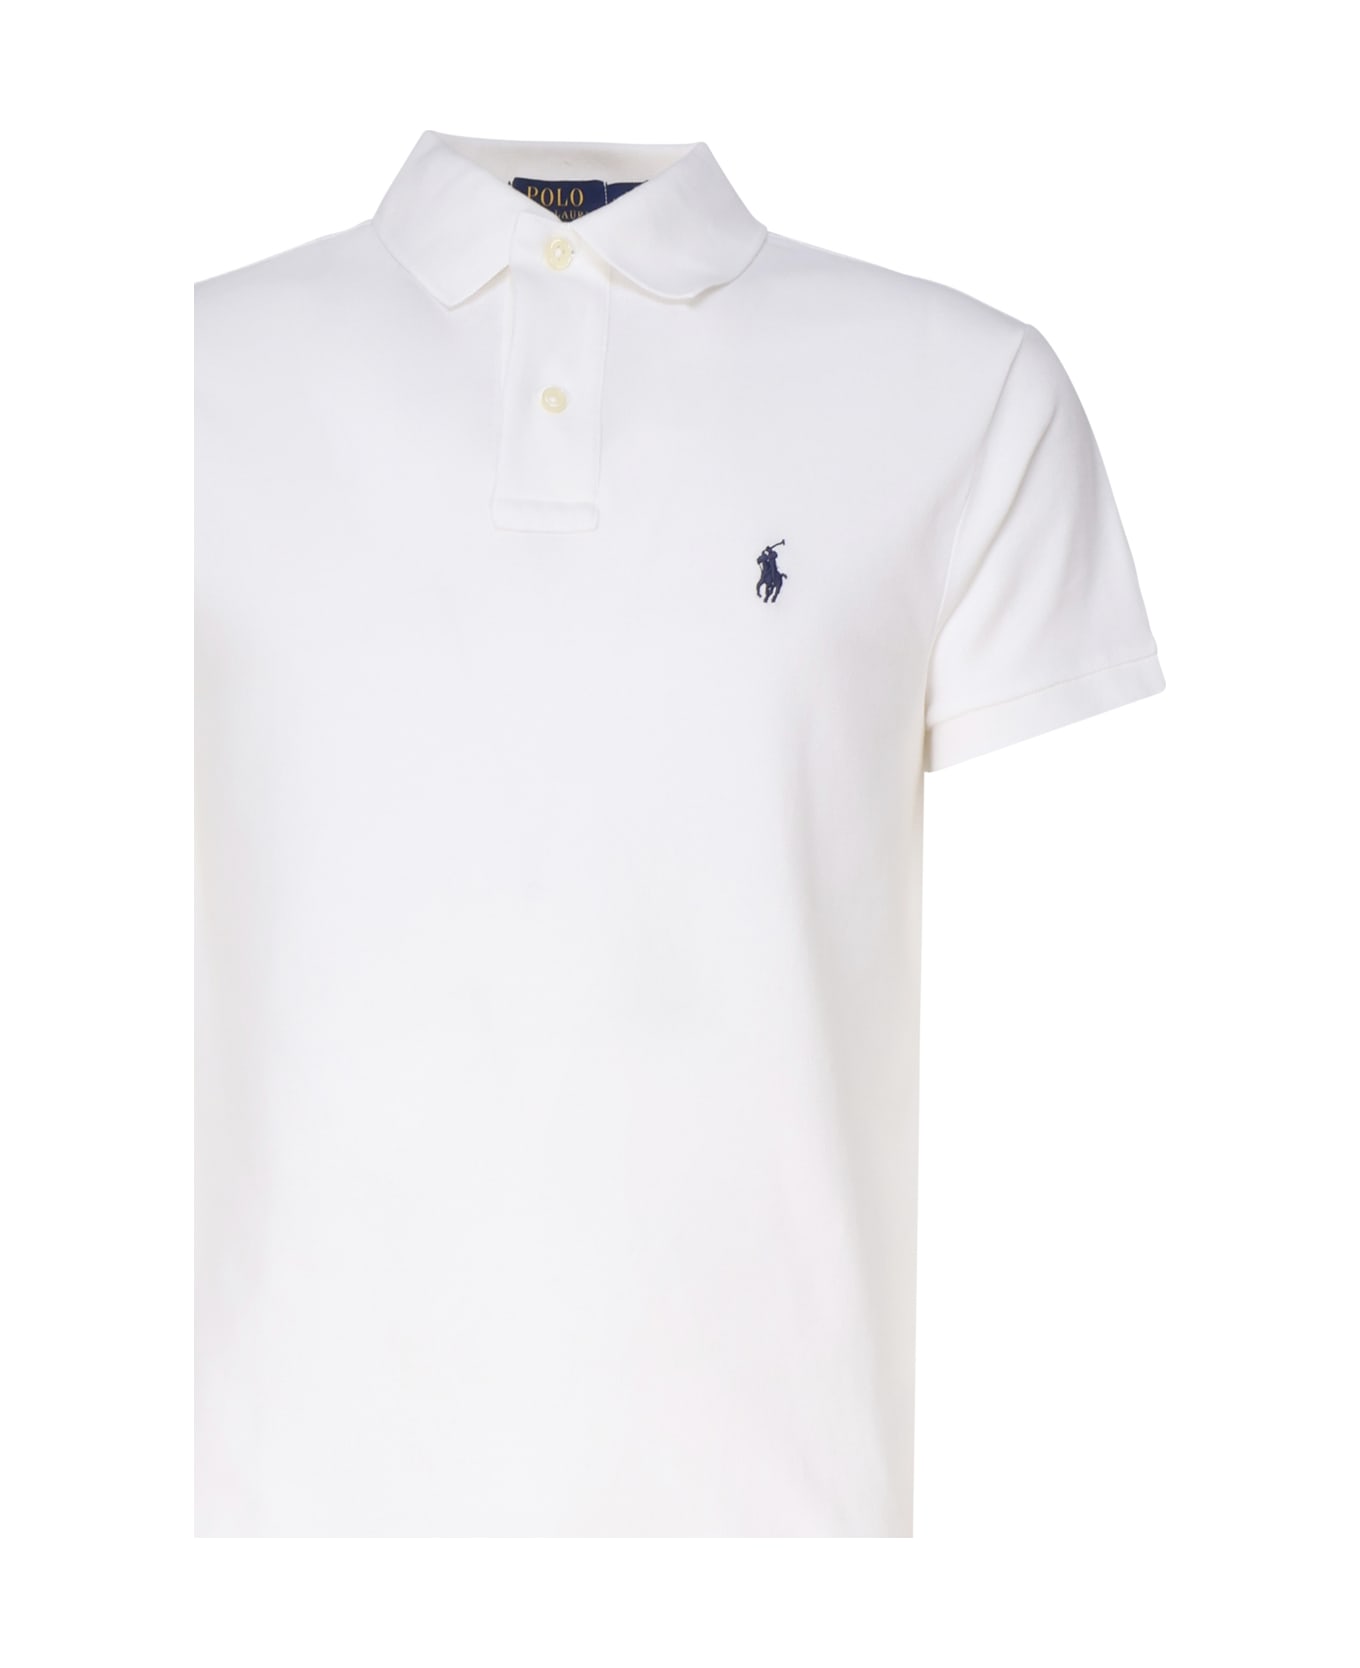 Polo Ralph Lauren Polo Shirt With Logo - White ポロシャツ